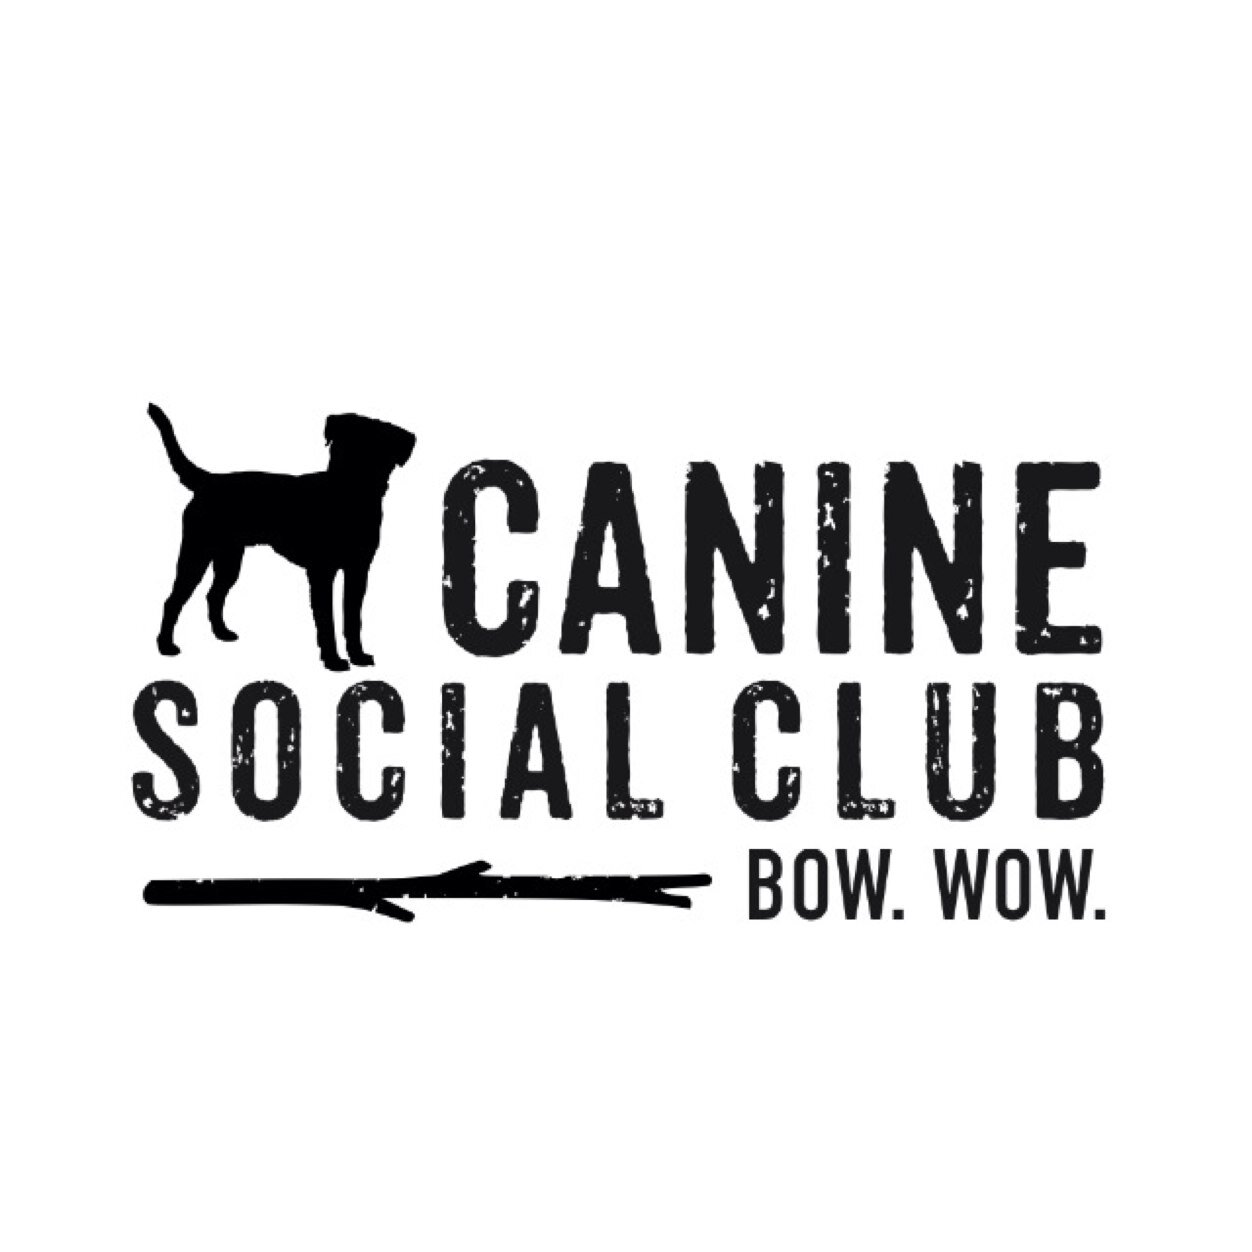 Building community through canine companionship, social events, day care, training and outdoor adventures! #inbend  #wagmore